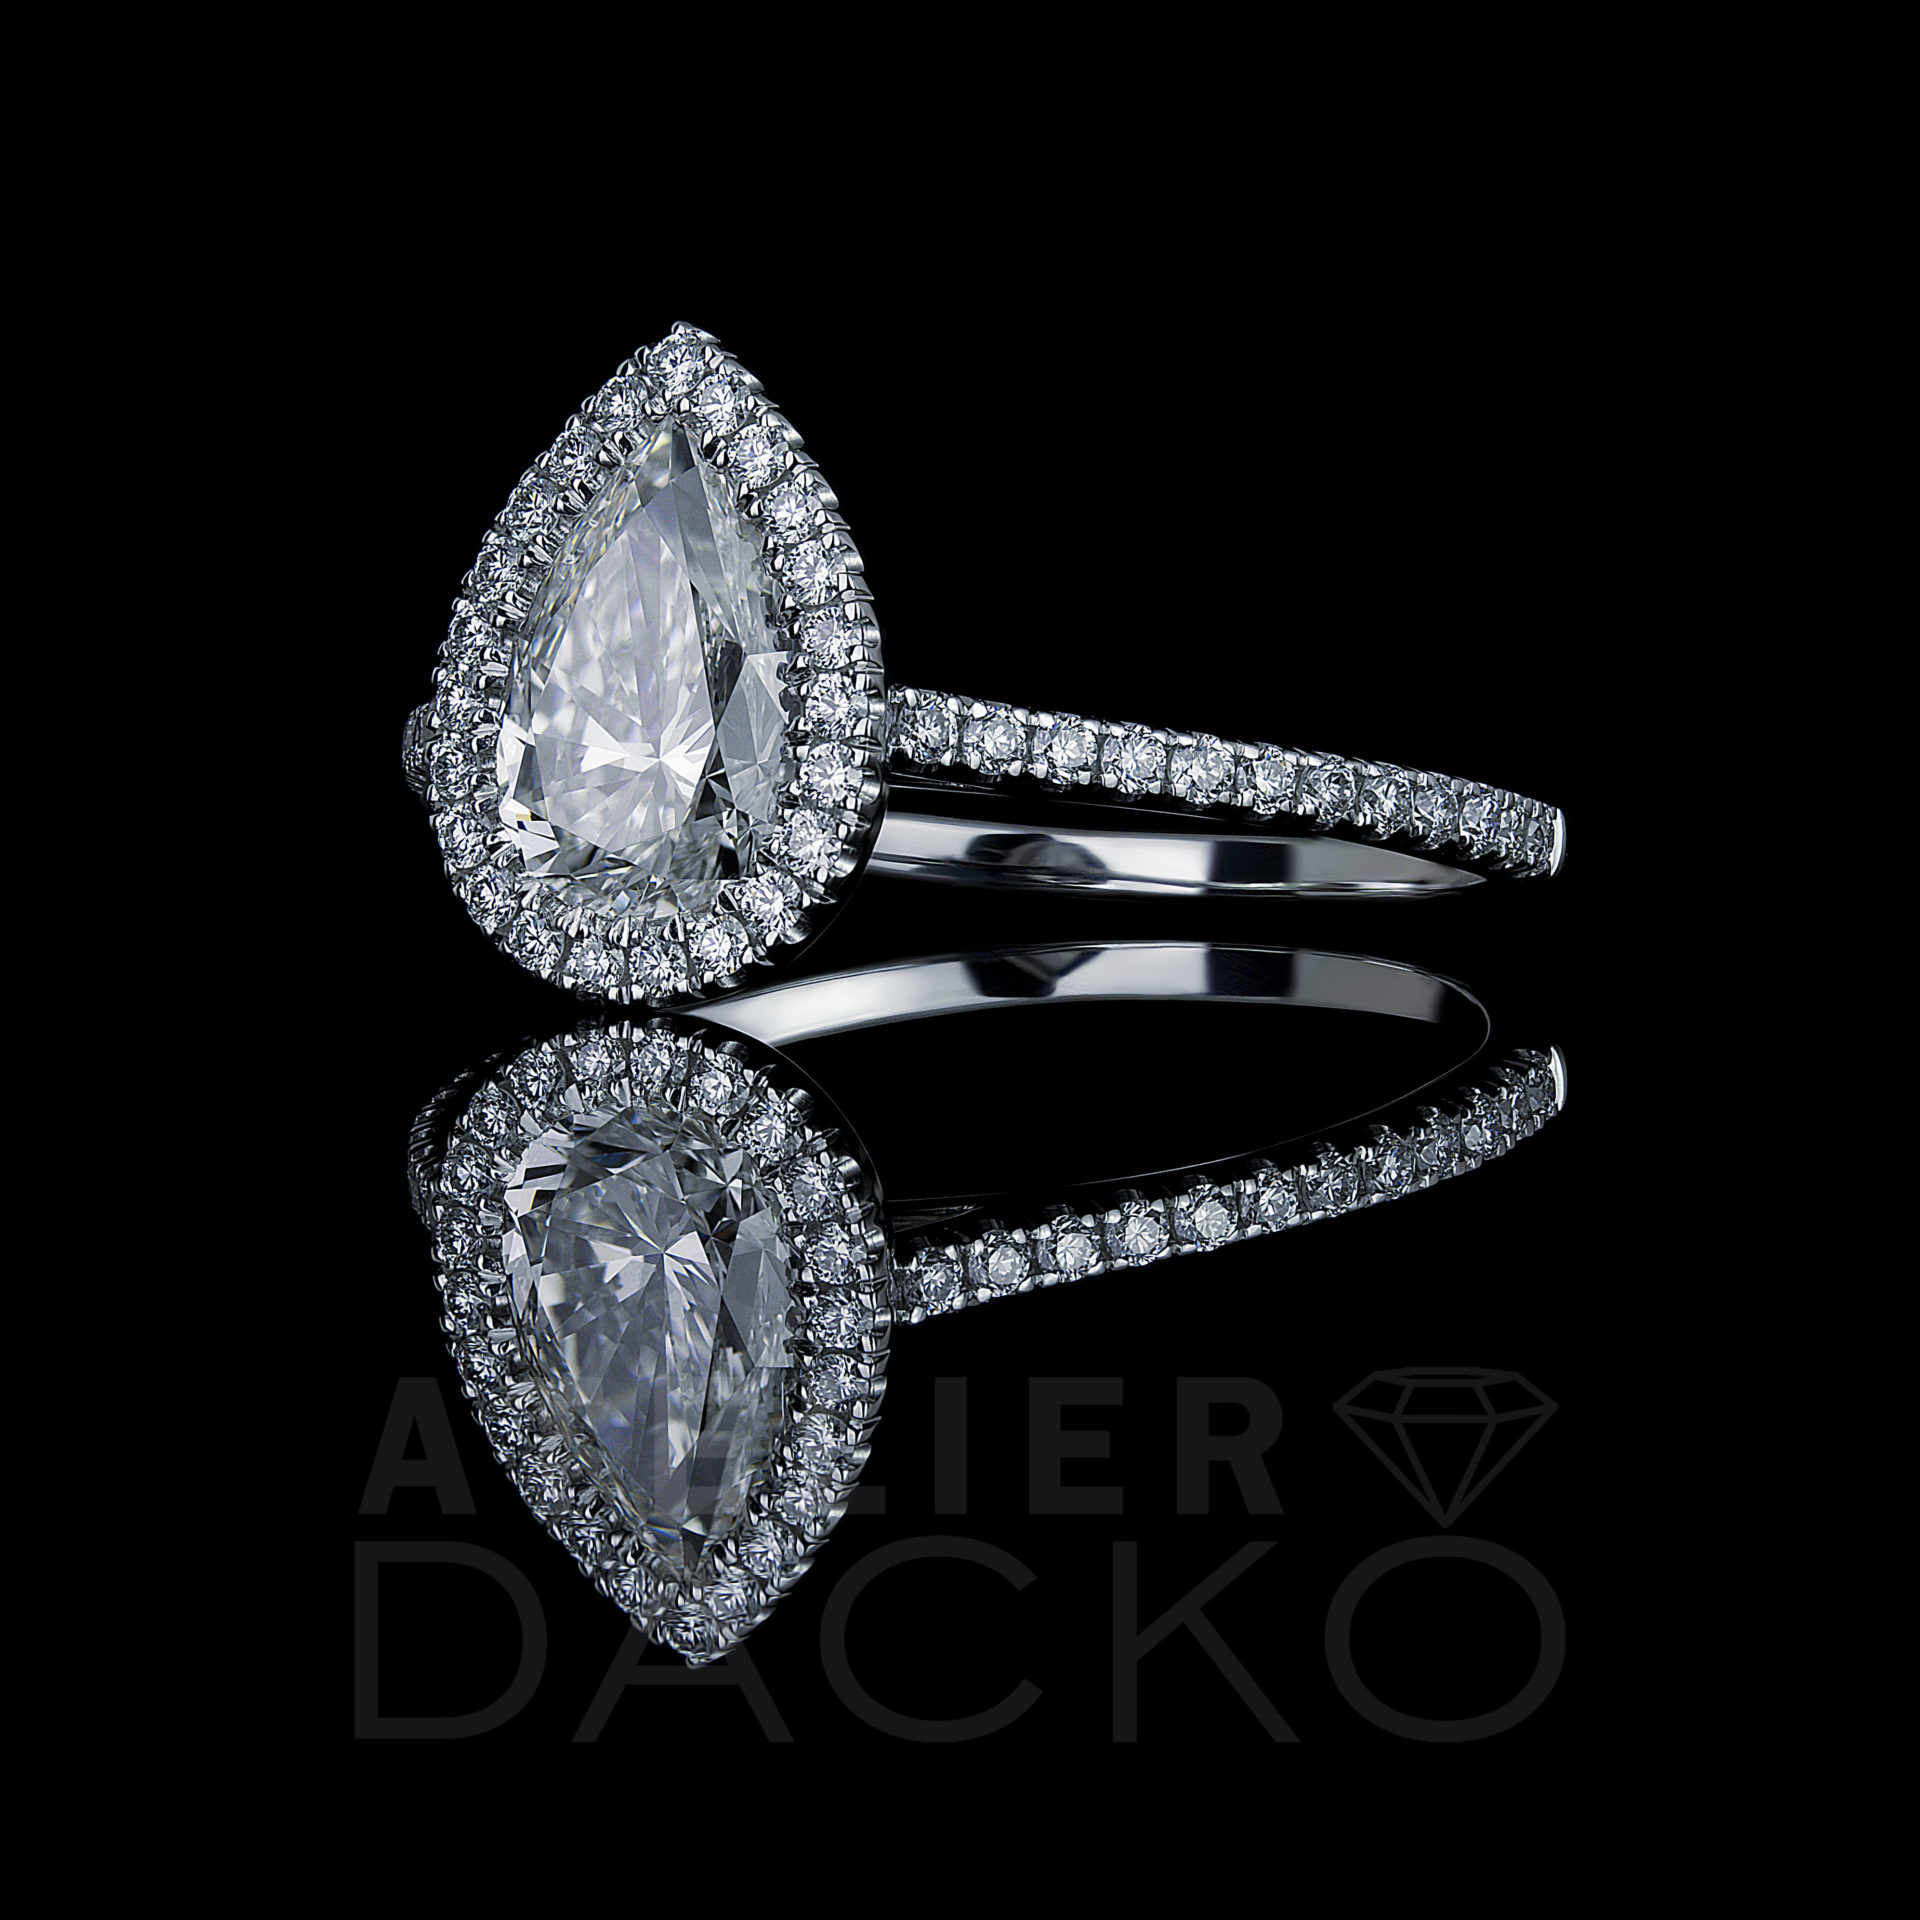 AD075-1.60 CT Pear Cut Diamond Engagement Ring in a Clawless Halo Setting-2